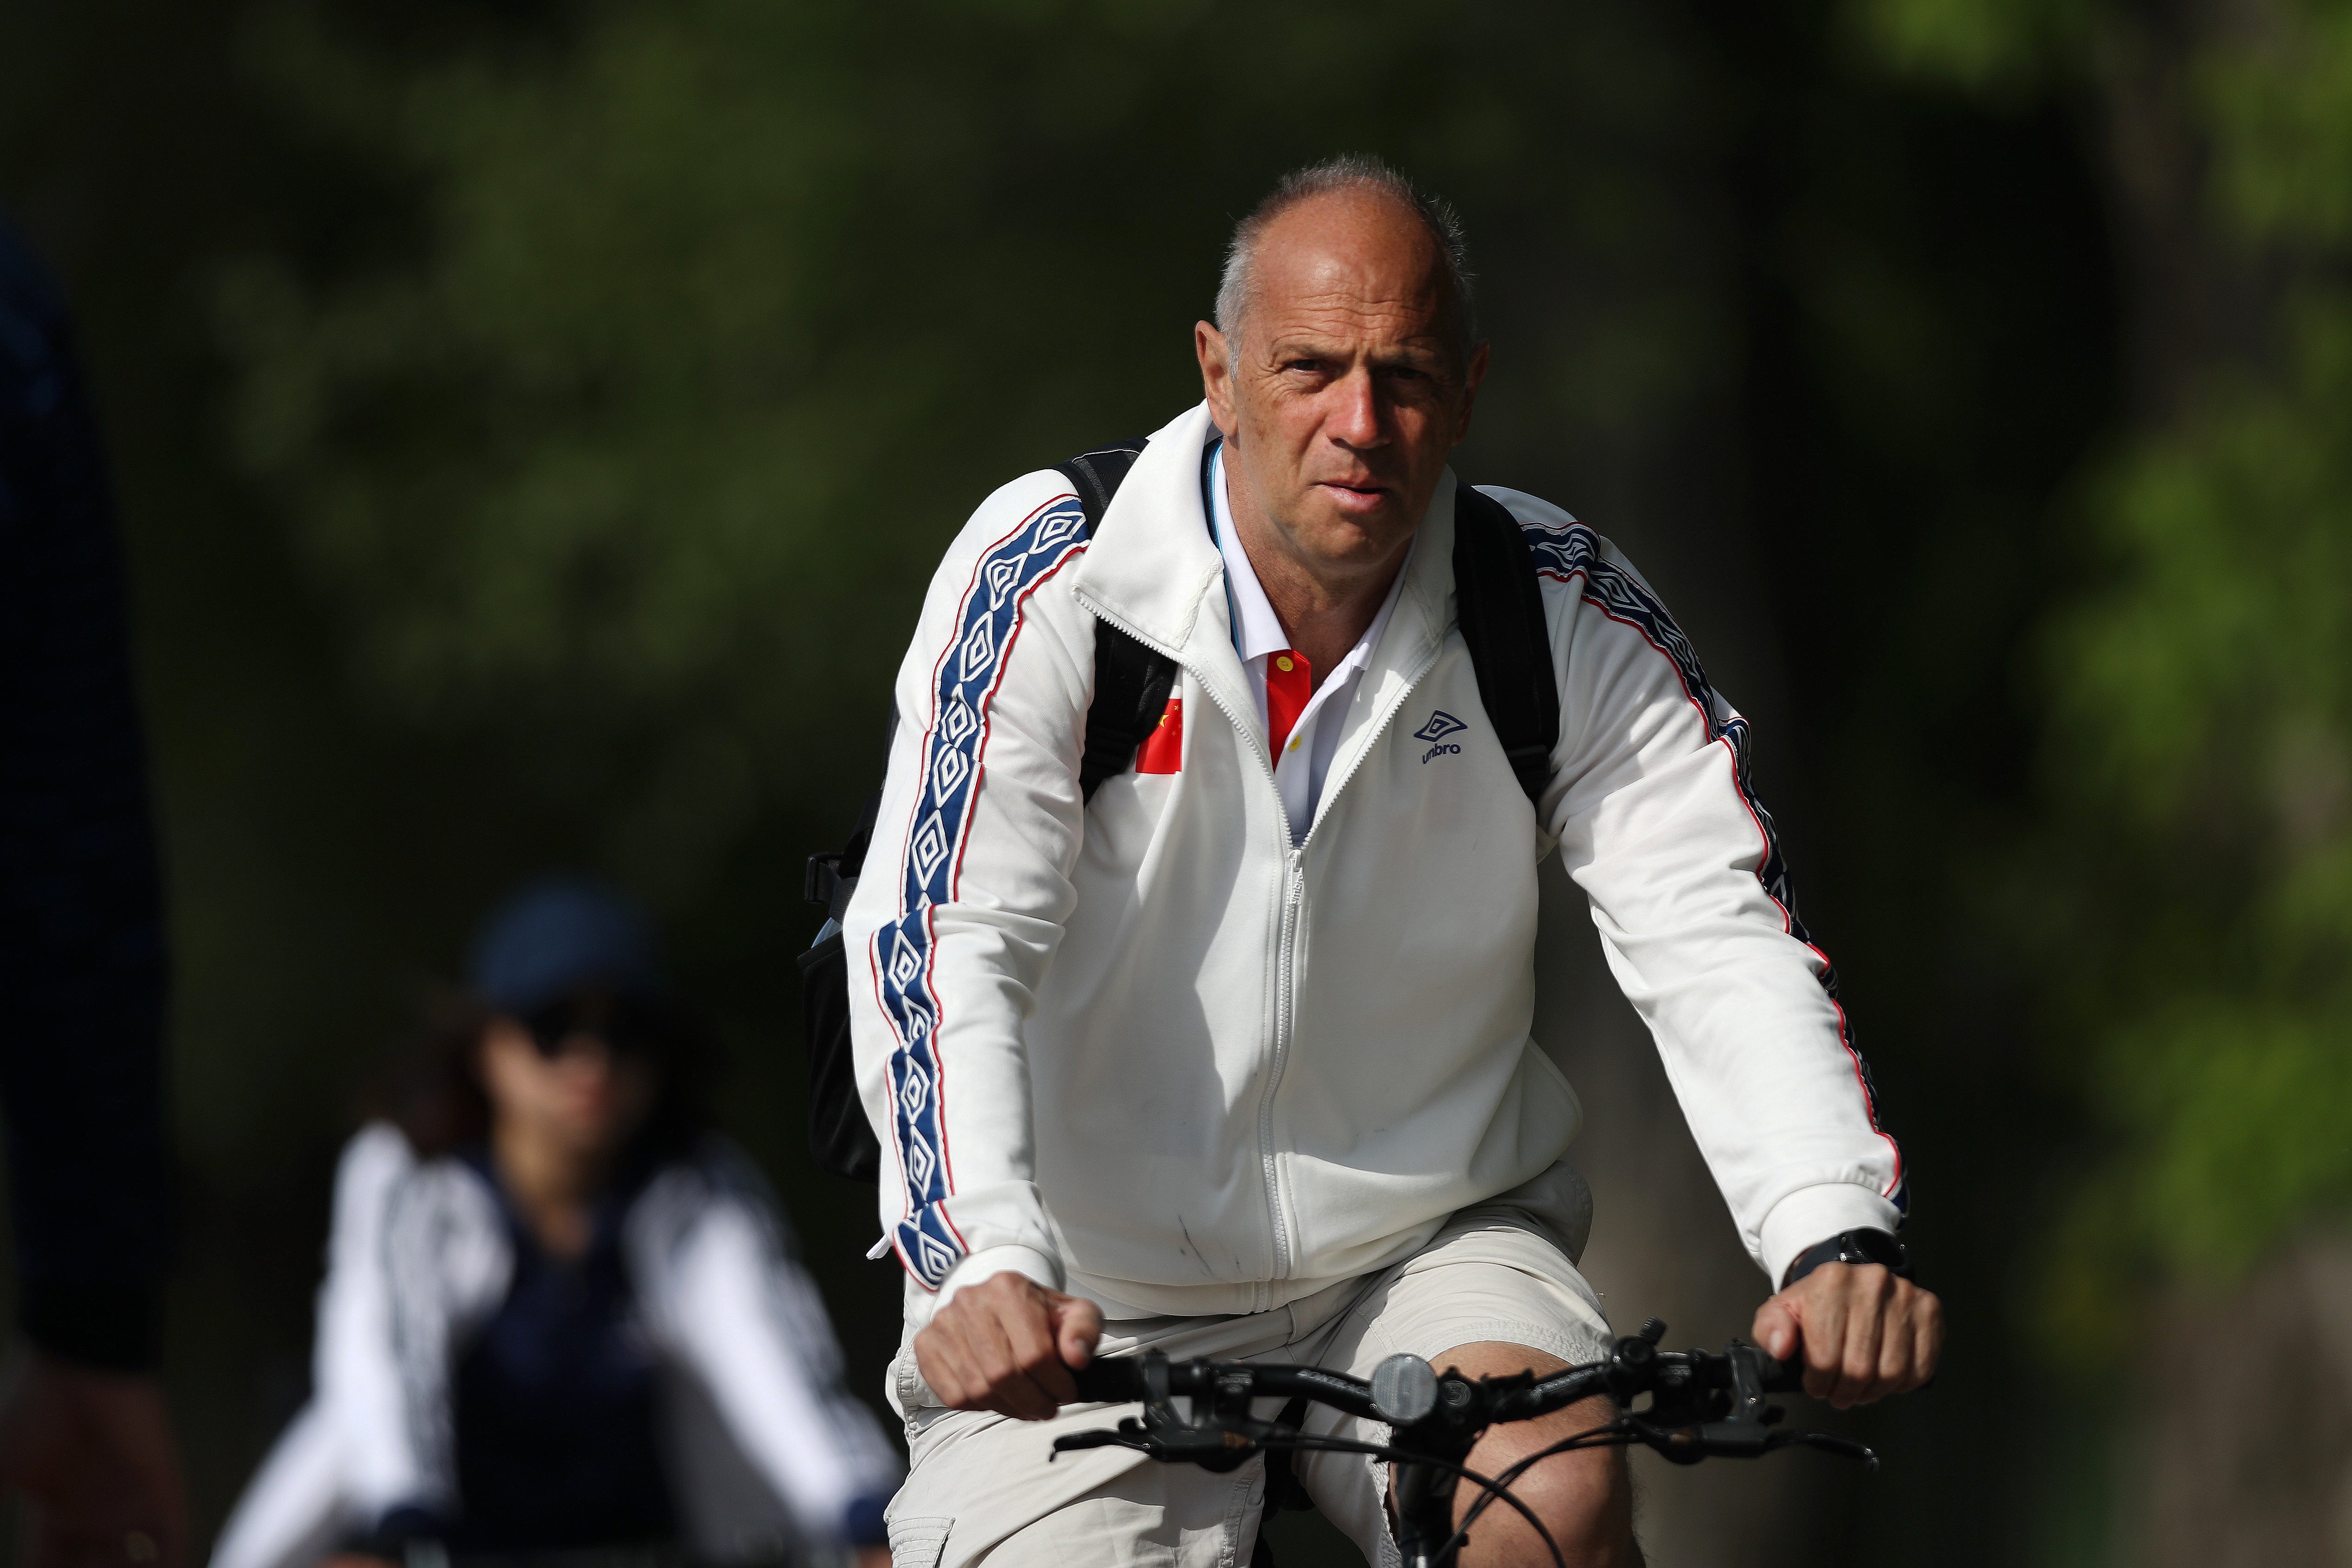 Britain’s most successful rower could lead the US effort in Paris